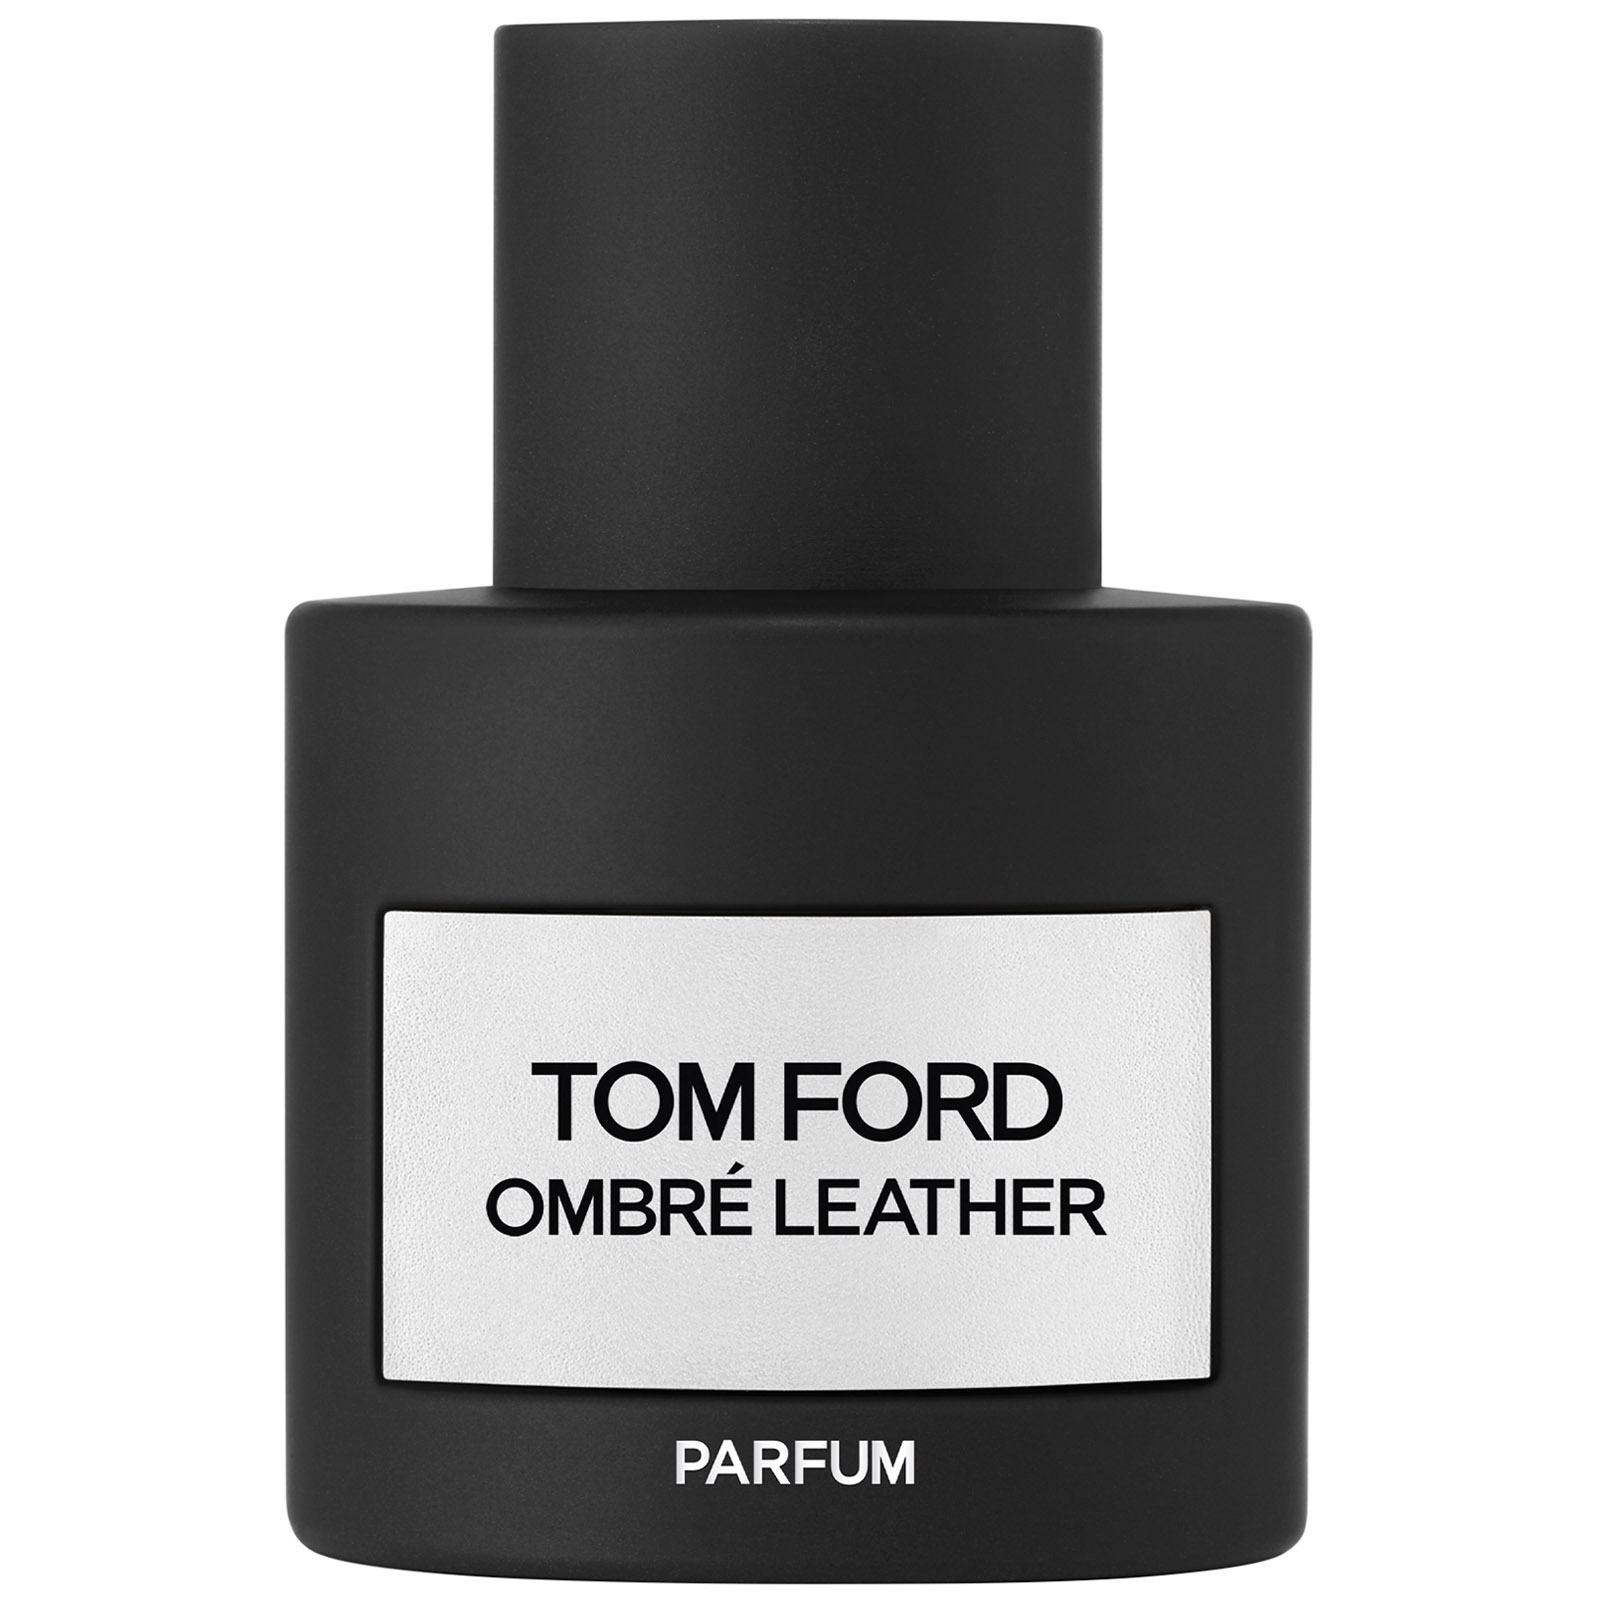 Парфюм Ombre Leather Parfum Tom Ford